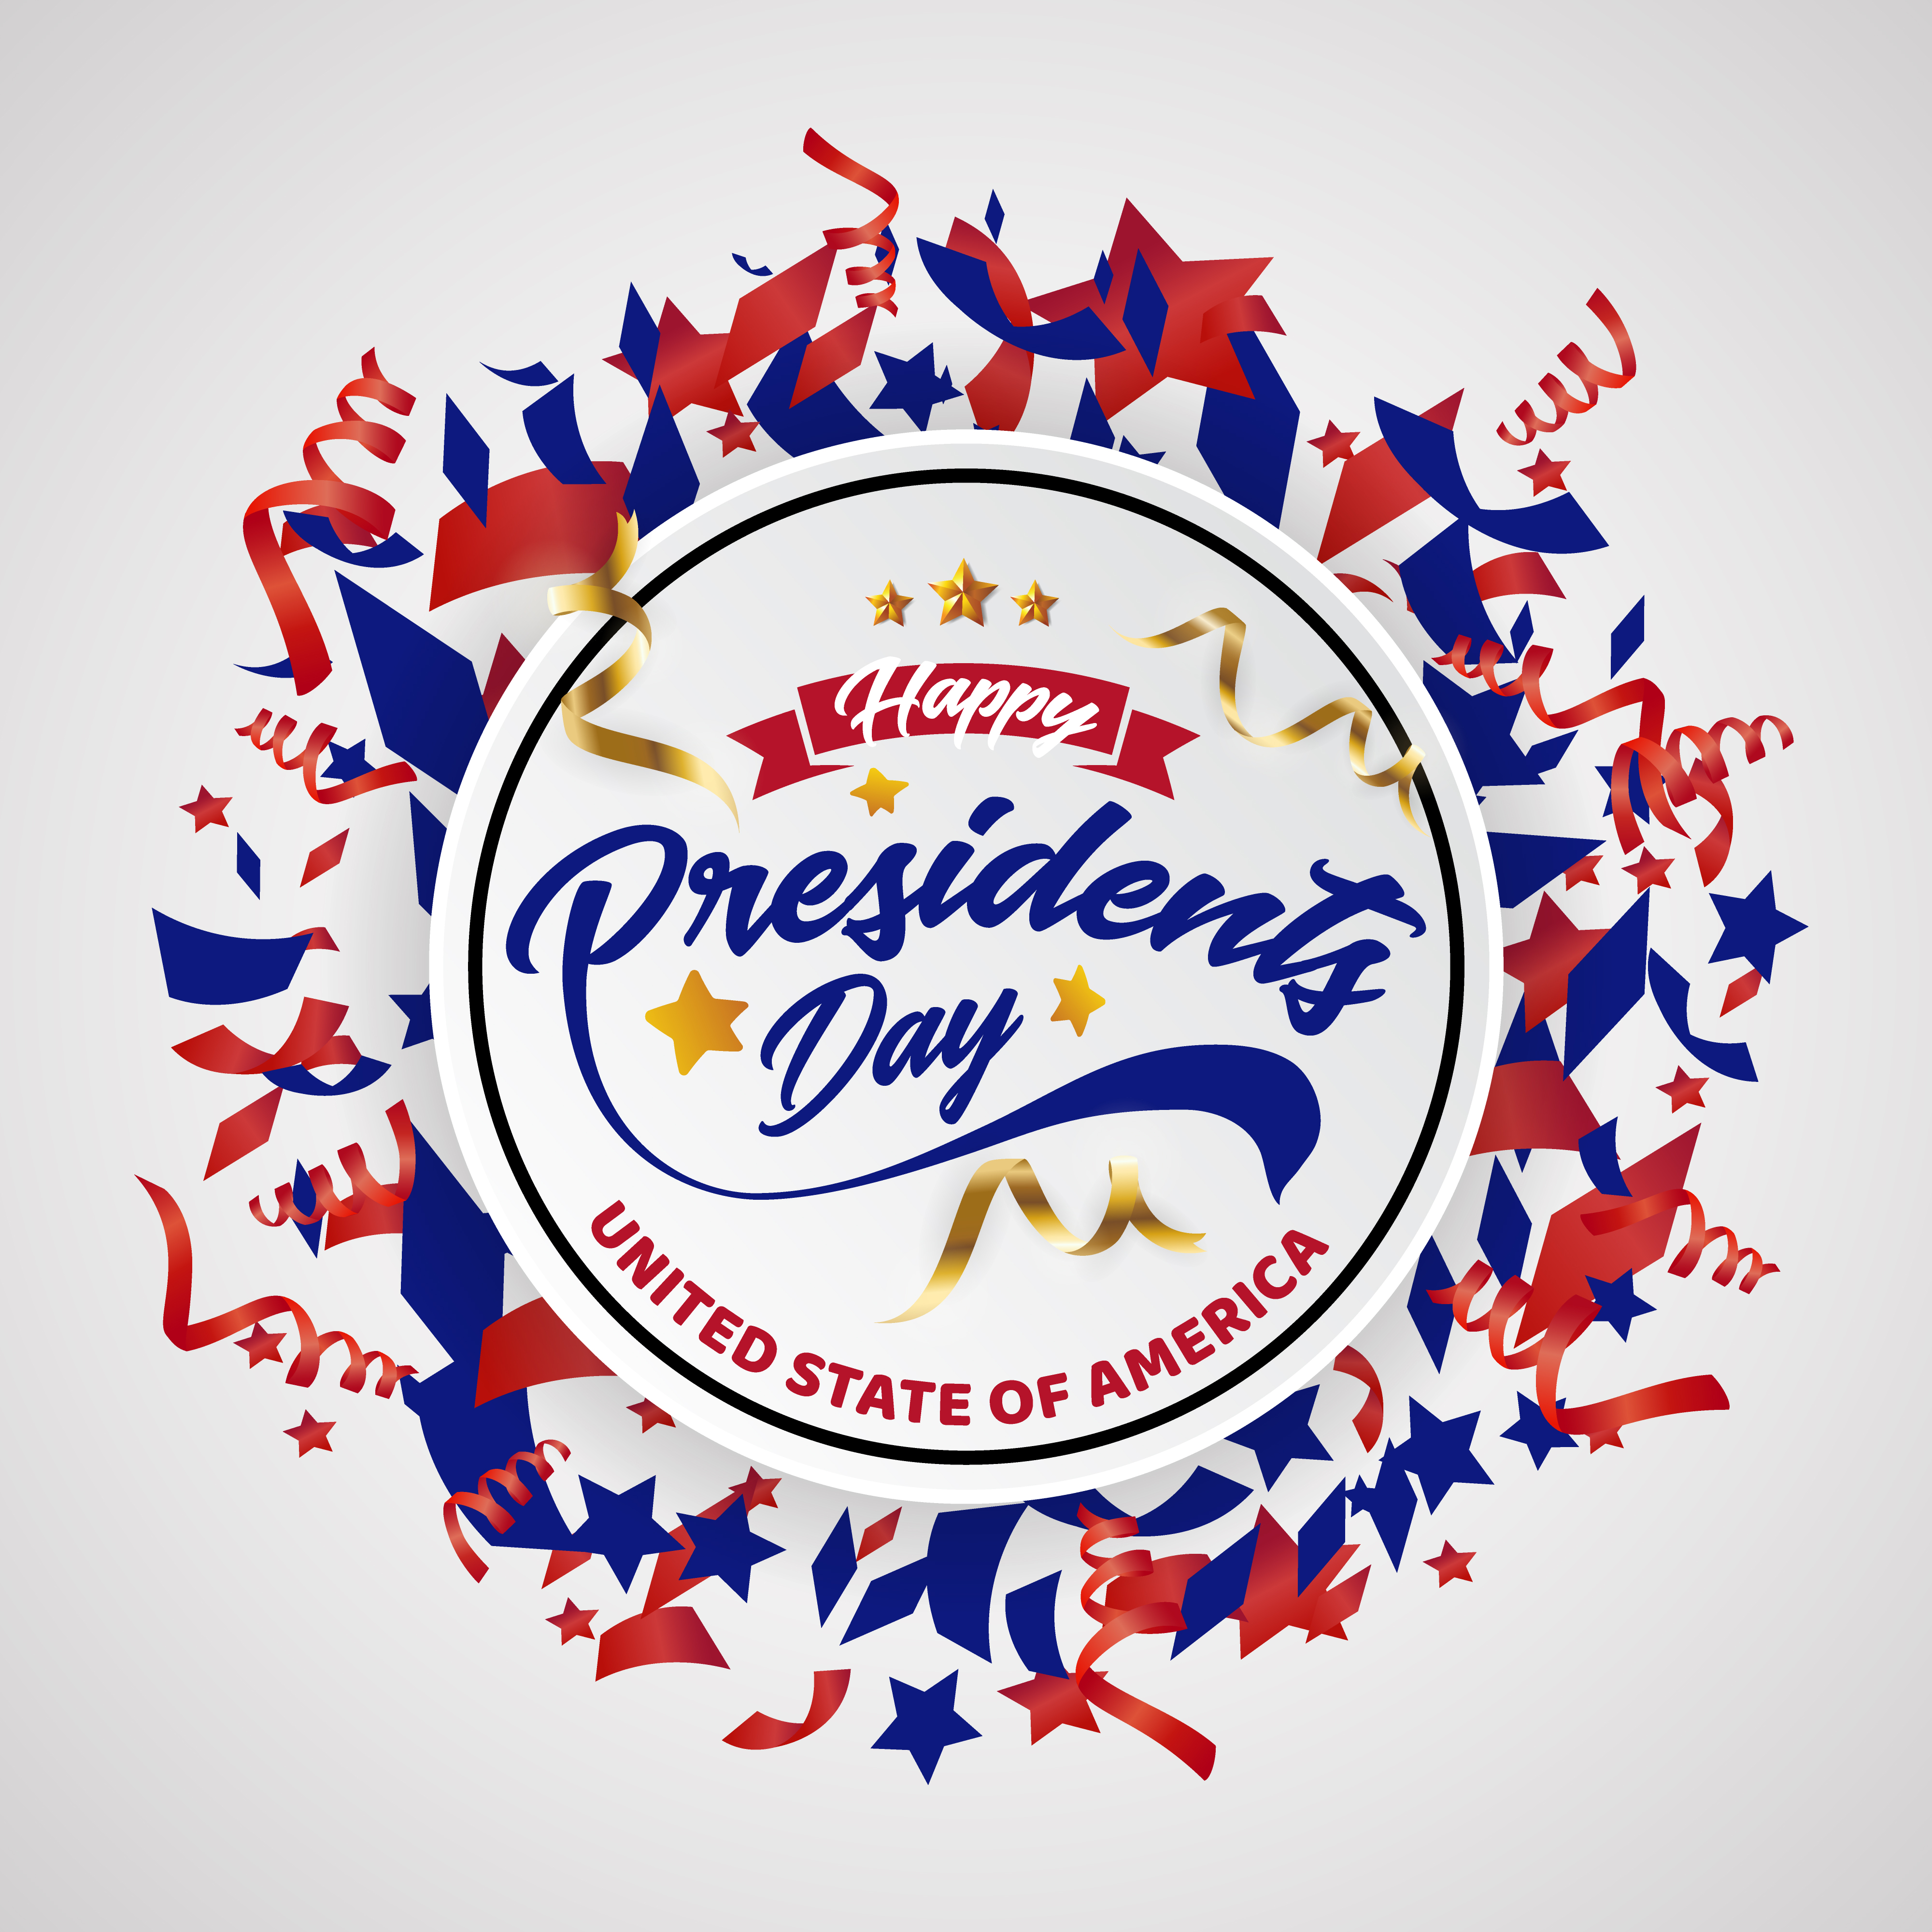 Happy Presidents Day Banner Background and Greeting Cards. Vector